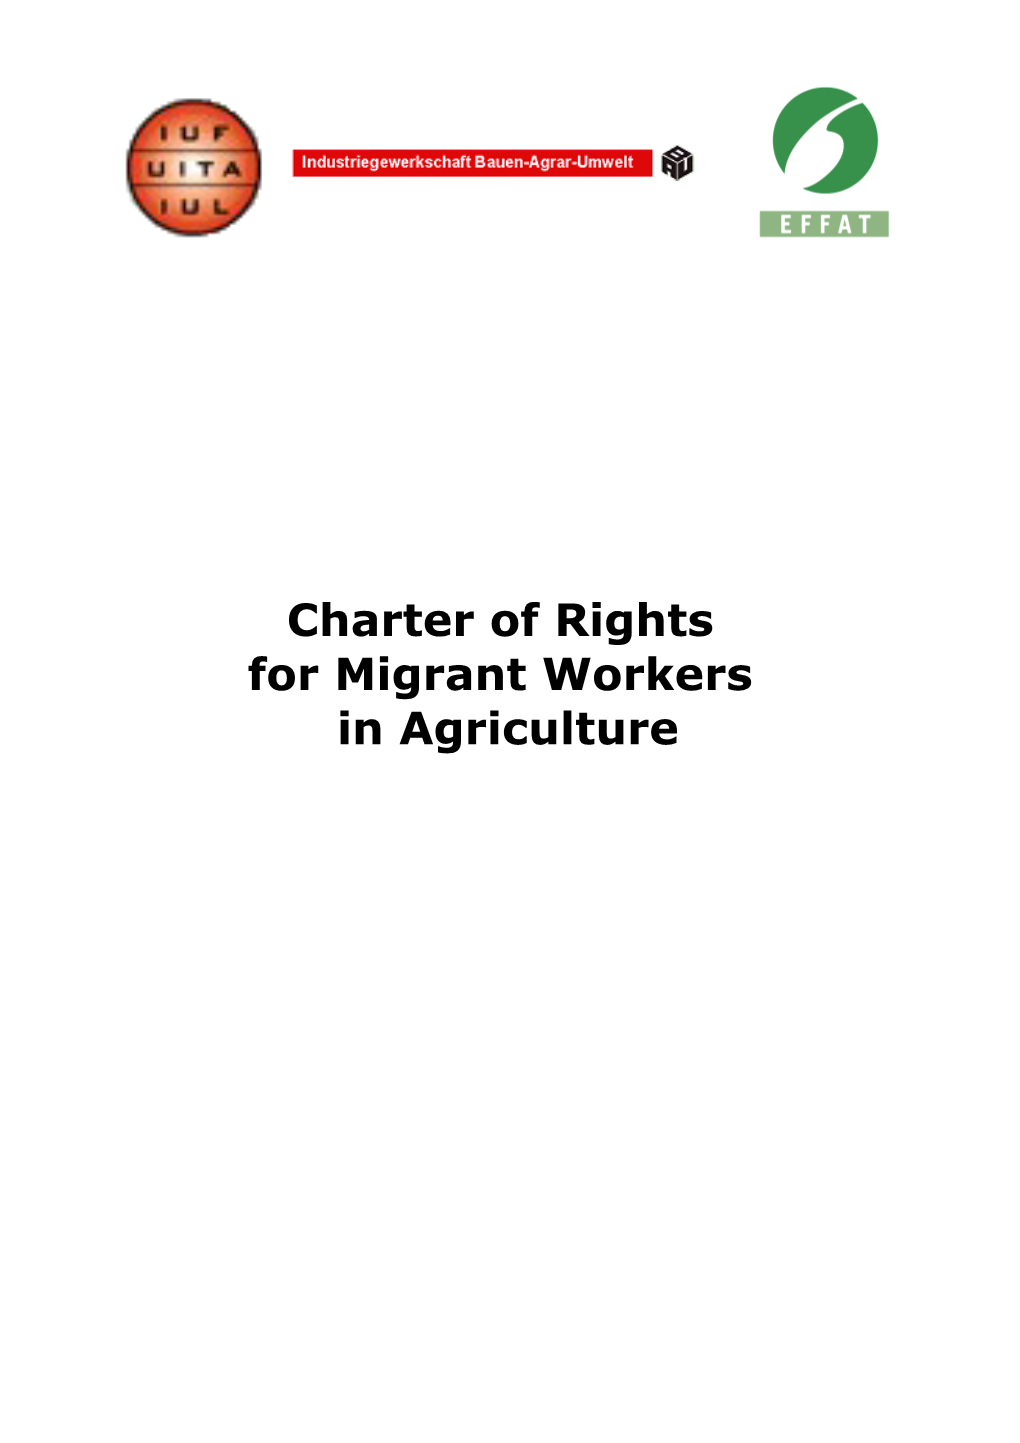 A Charter of Rights for Migrant Workers in Agriculture